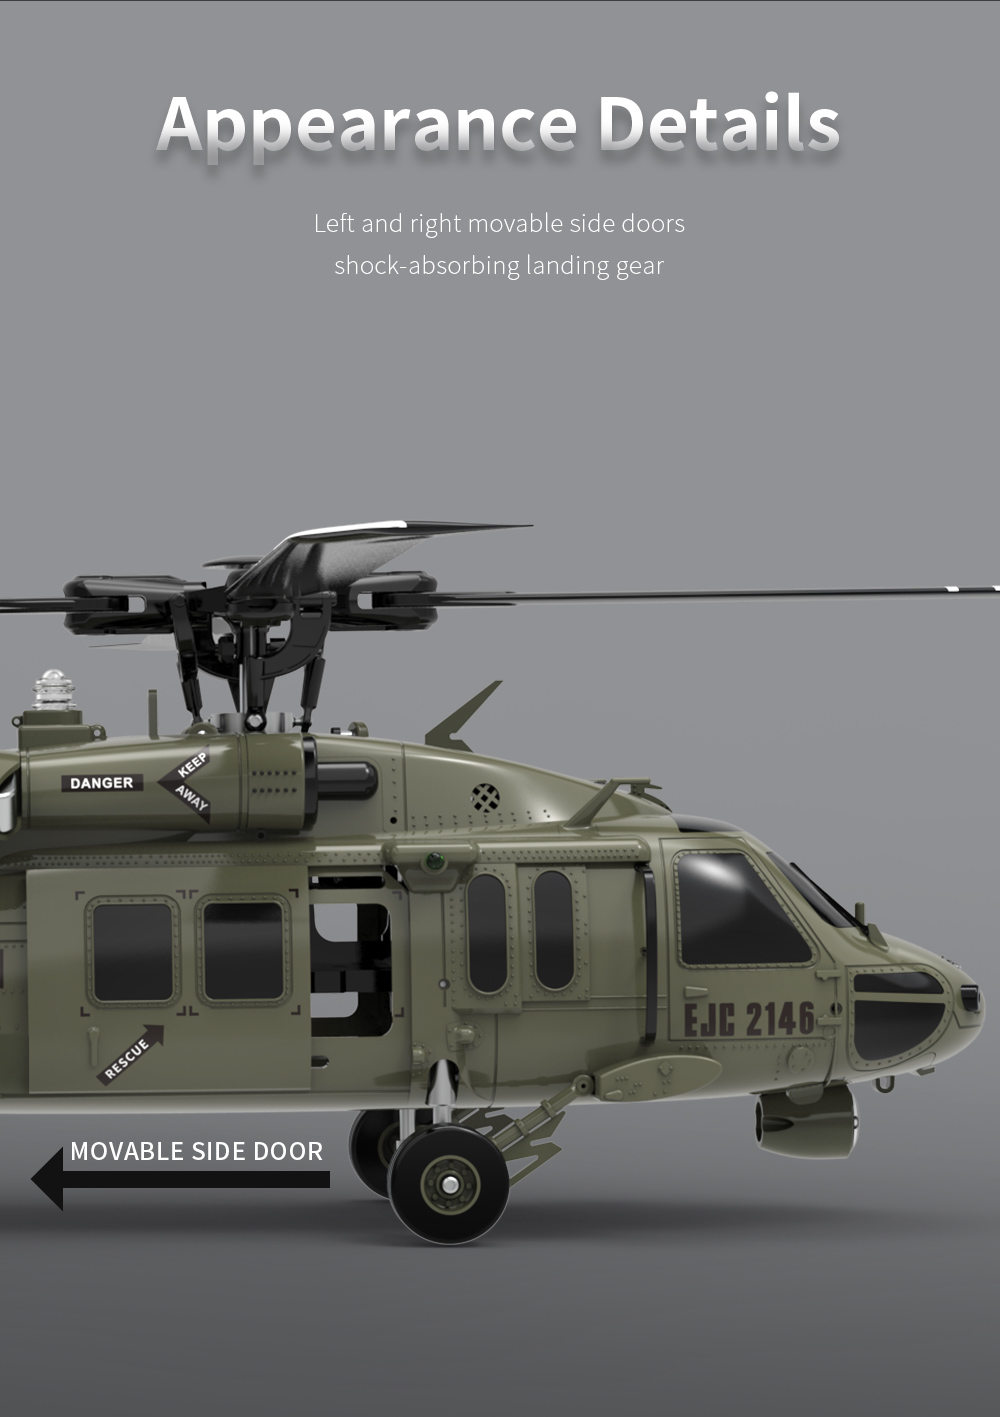 UH-60 Black Hawk RC Military Helicopter (new military helicopter, helicopter plane military, canadian military helicopter)